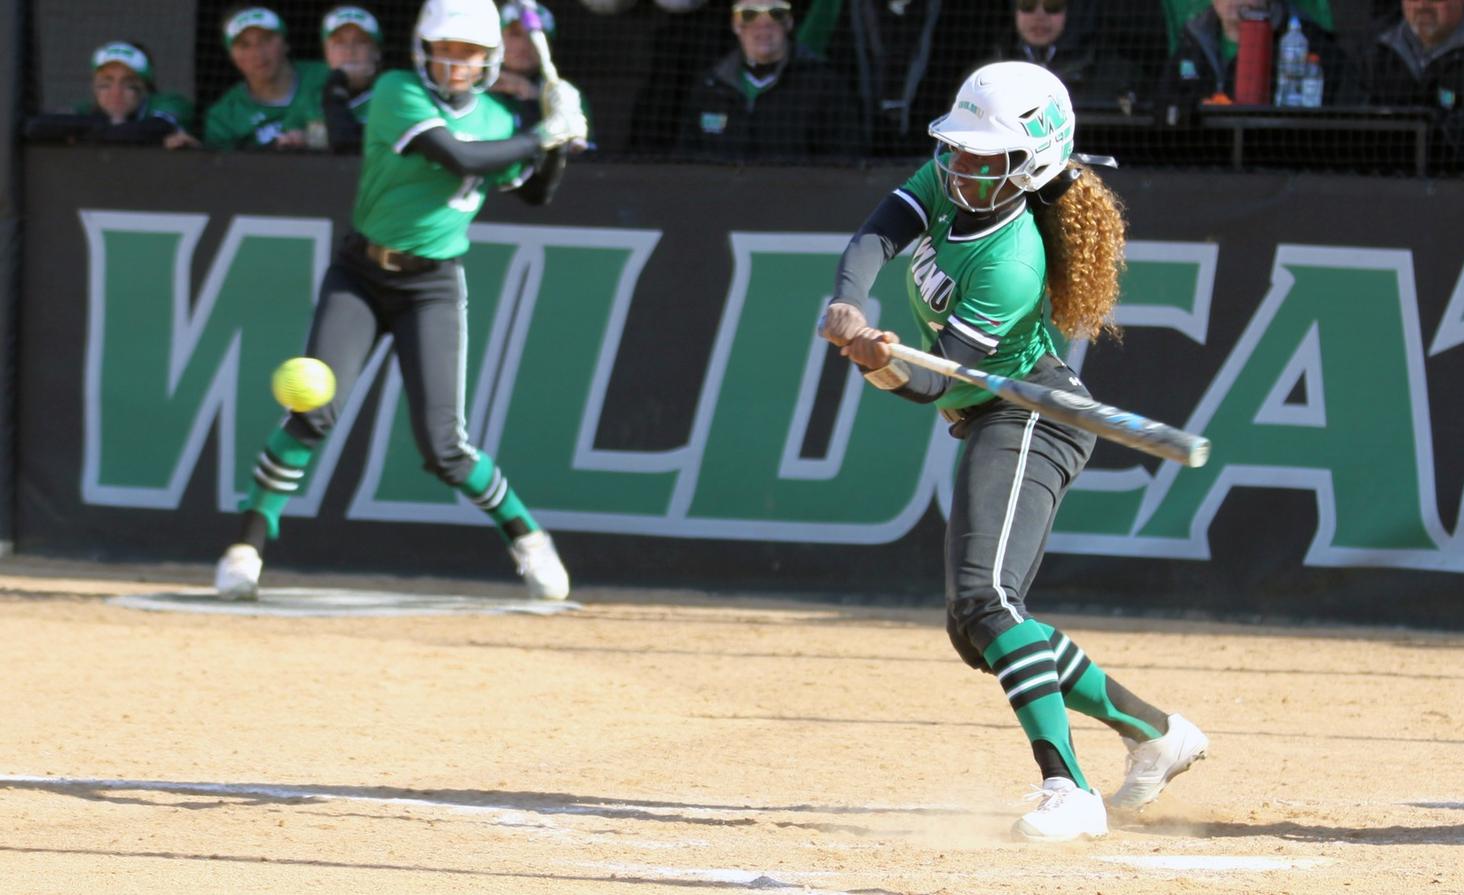 Copyright 2019; Wilmington University. All rights reserved. Photo by Dan Lauletta. March 16, 2019 vs. Bridgeport (Game 2).